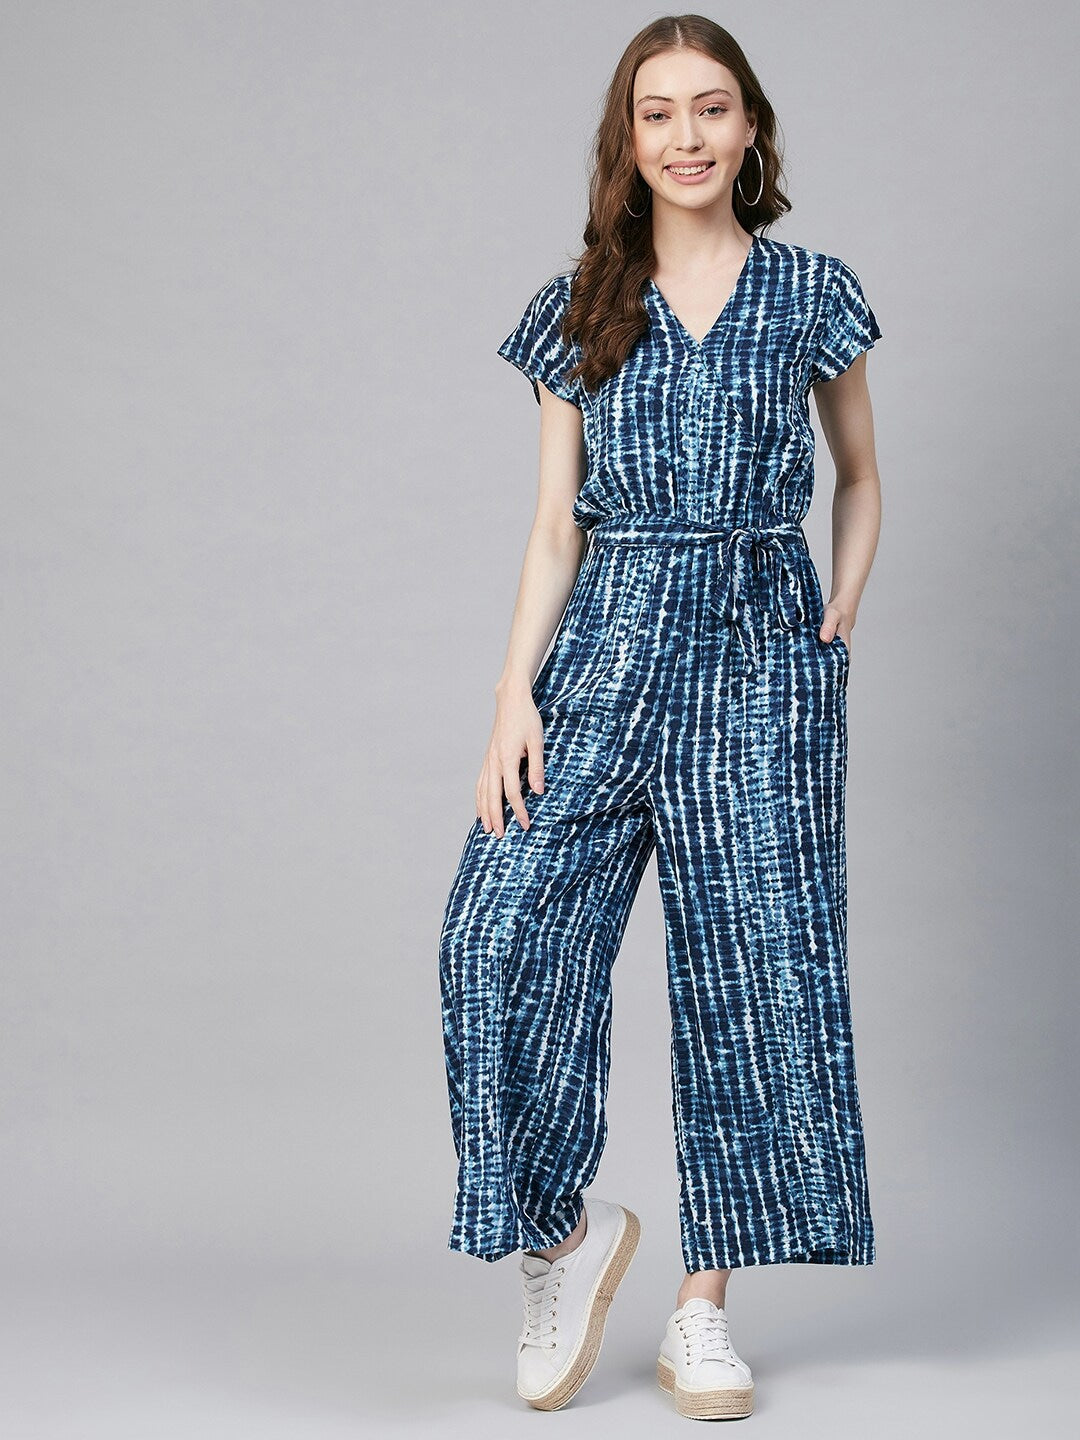 Blue Tie-Dye Jumpsuit with Tie-up knot in front